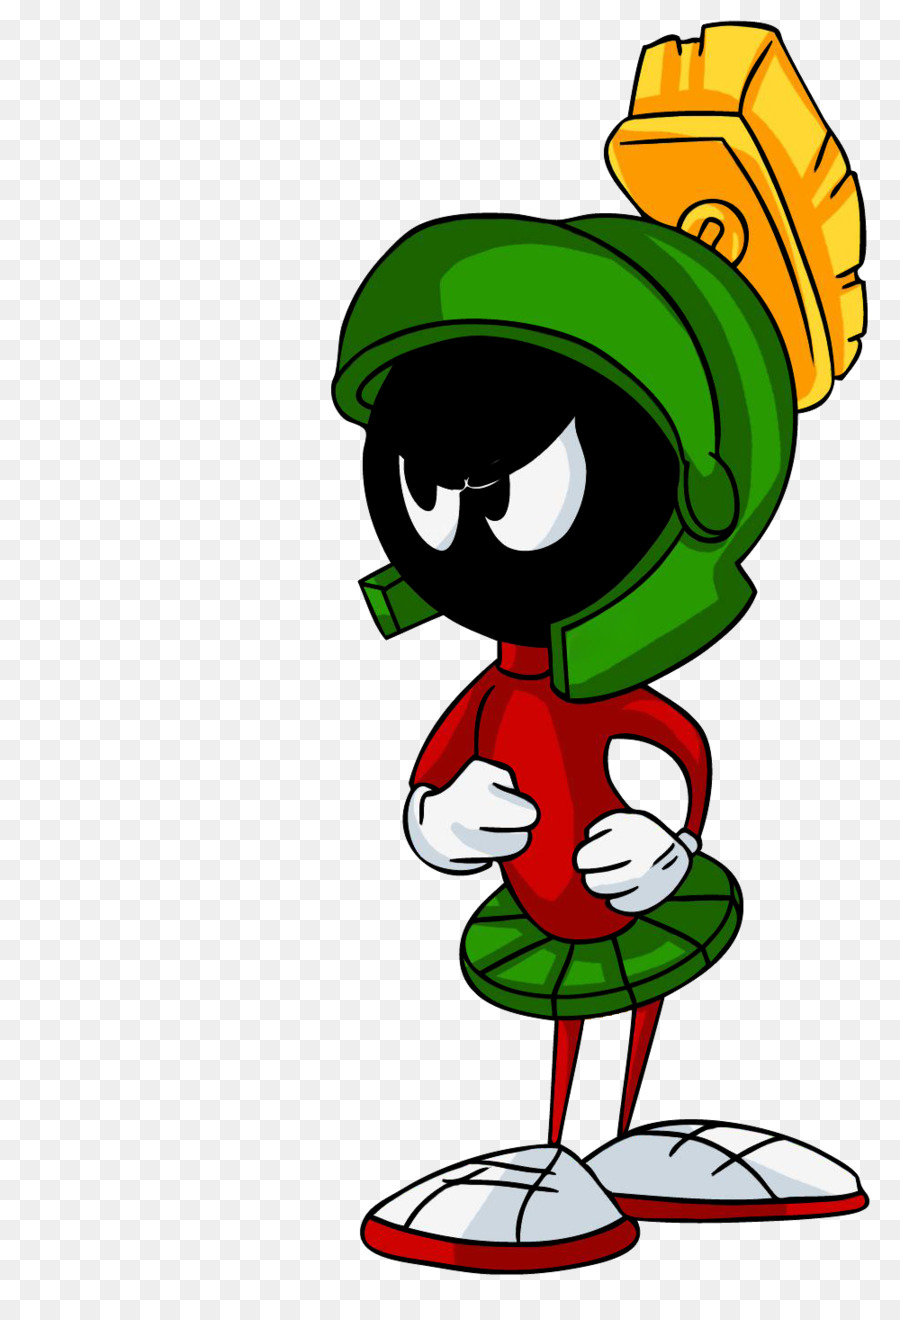 Marvin the Martian Martian Manhunter Cartoon Drawing Looney Tunes - waters. png download - 1000*1456 - Free Transparent Marvin The Martian png Download.